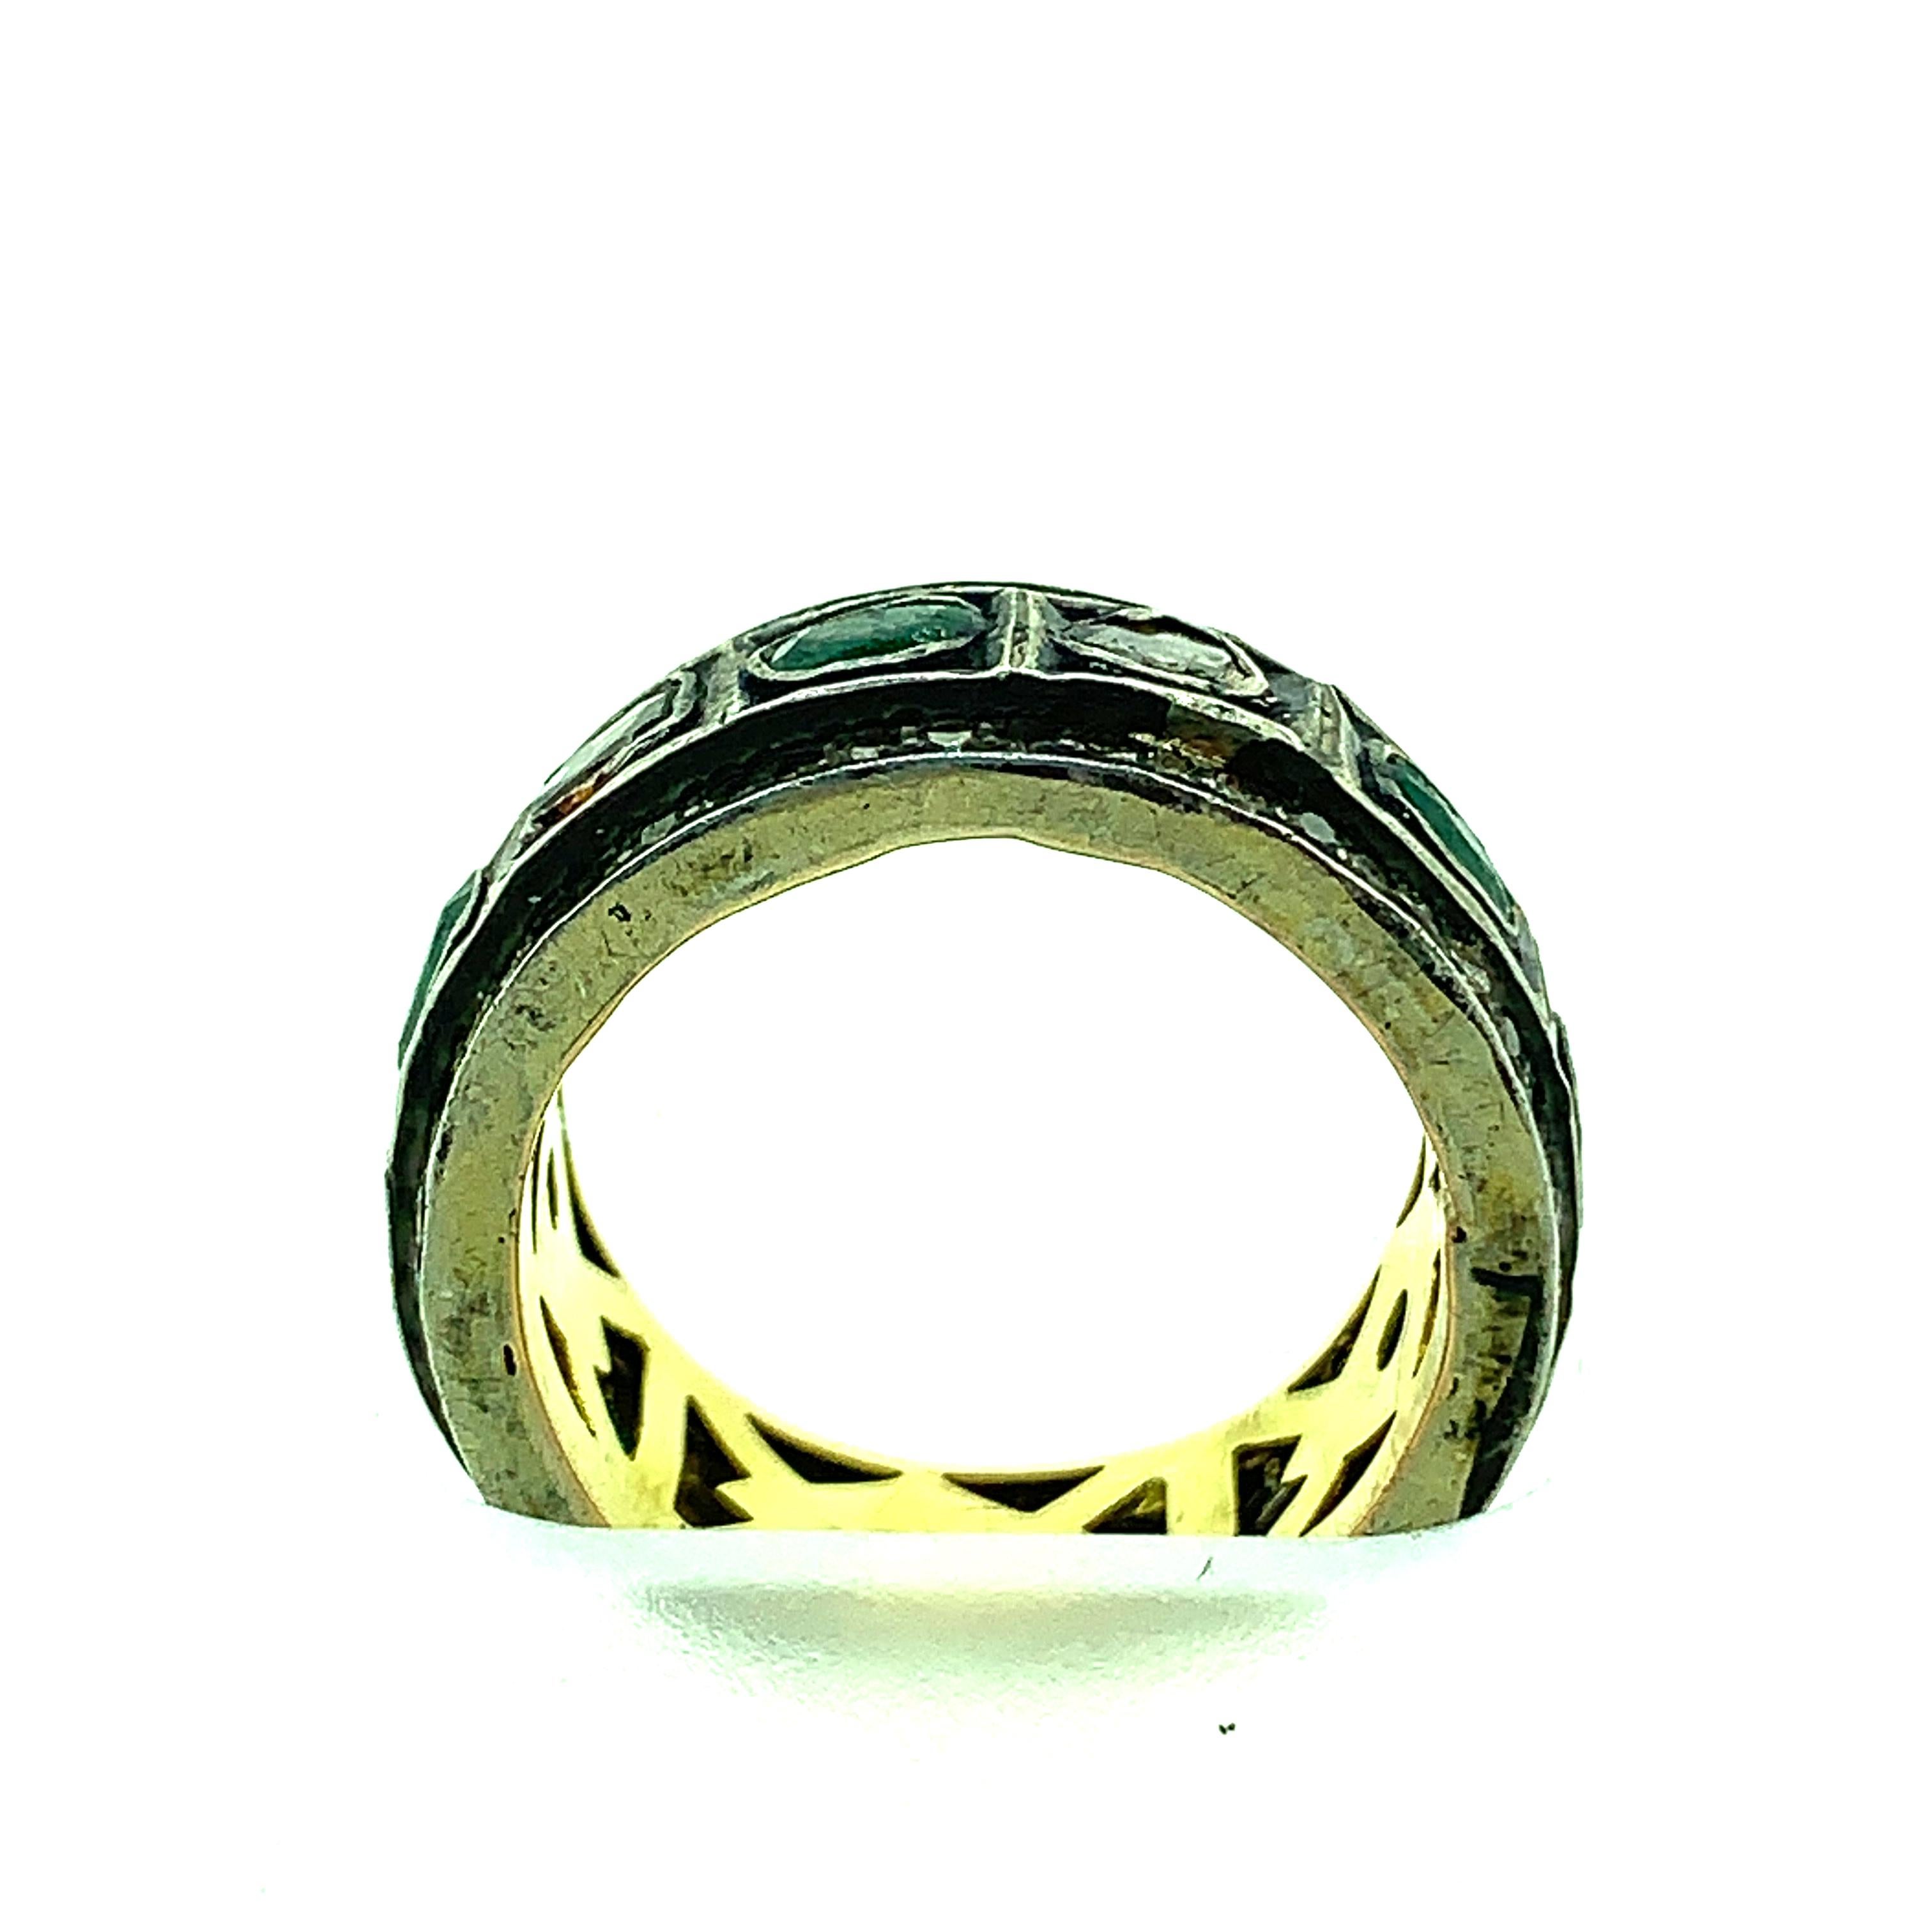 0.91 ct Old Mine Cut (Polki Diamond) and 1.02 ct Emerald Ring Band set in Oxidized Sterling Silver and 14K pure Gold. The ring band is neatly carved on the inside with 14KT Pure Gold and on the front it has a line of old mine cut diamonds surrounded